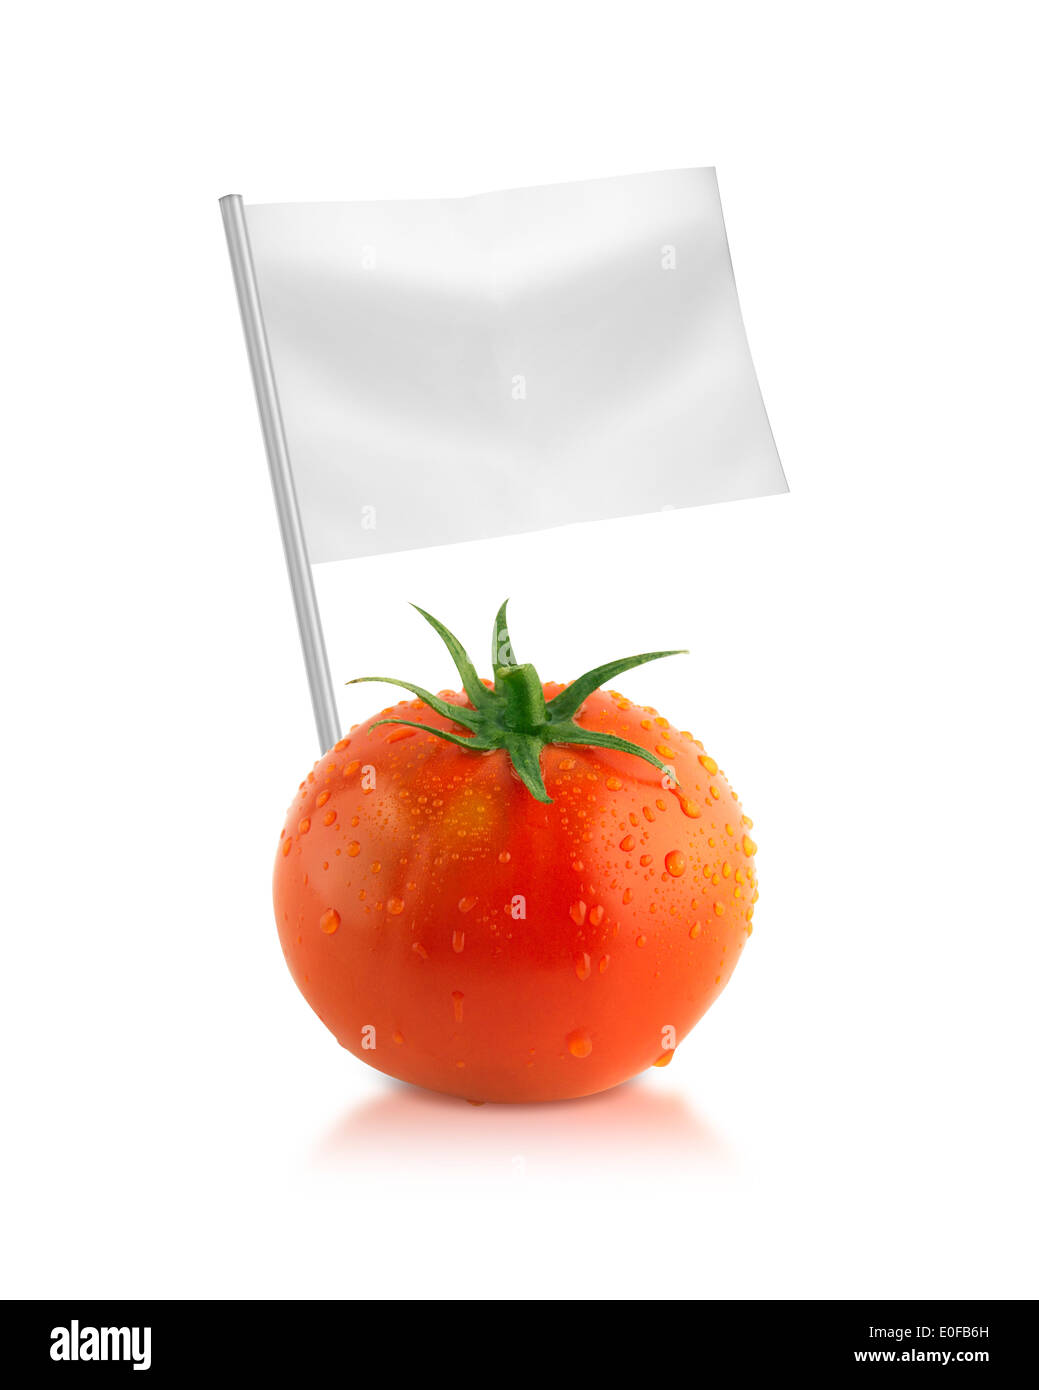 Healthy and organic food concept. Fresh Tomato with flags showing the benefits or the price of fruits. Stock Photo